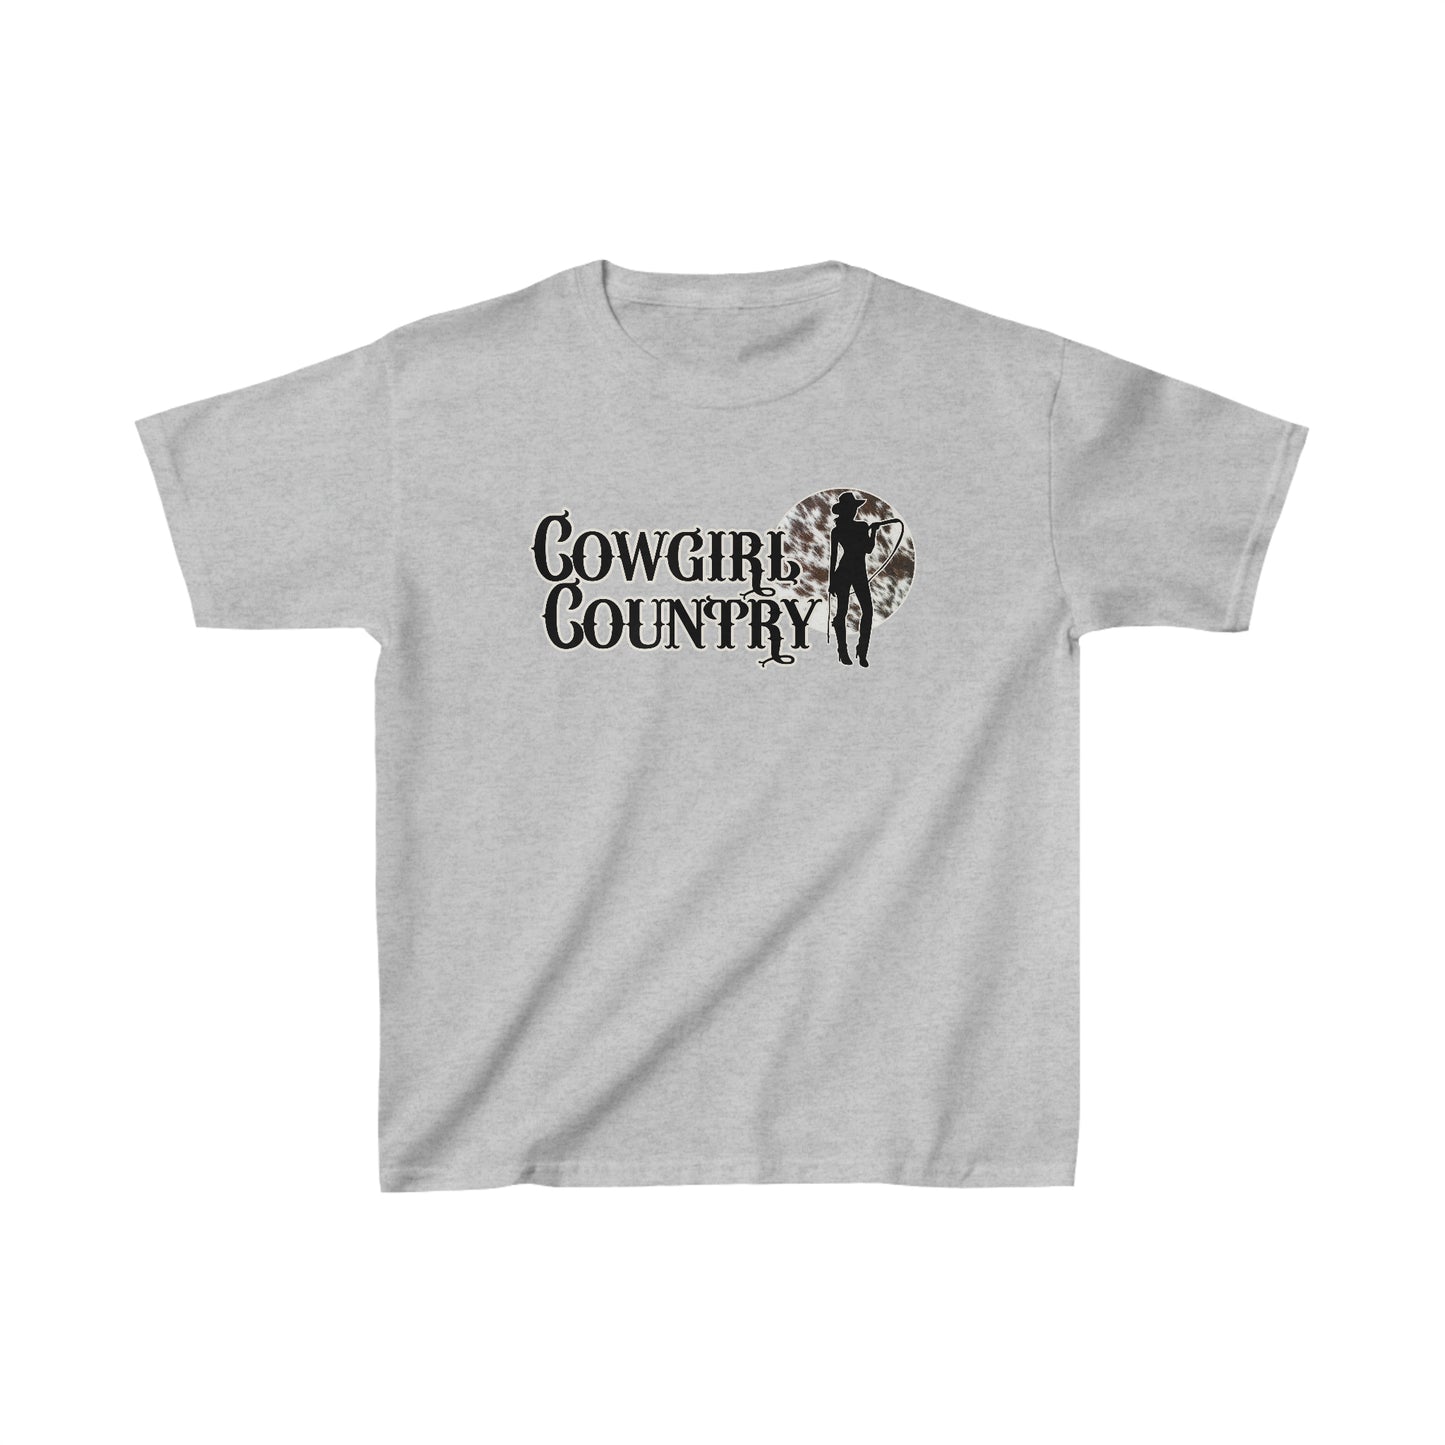 Cowgirl Country Kids Tee